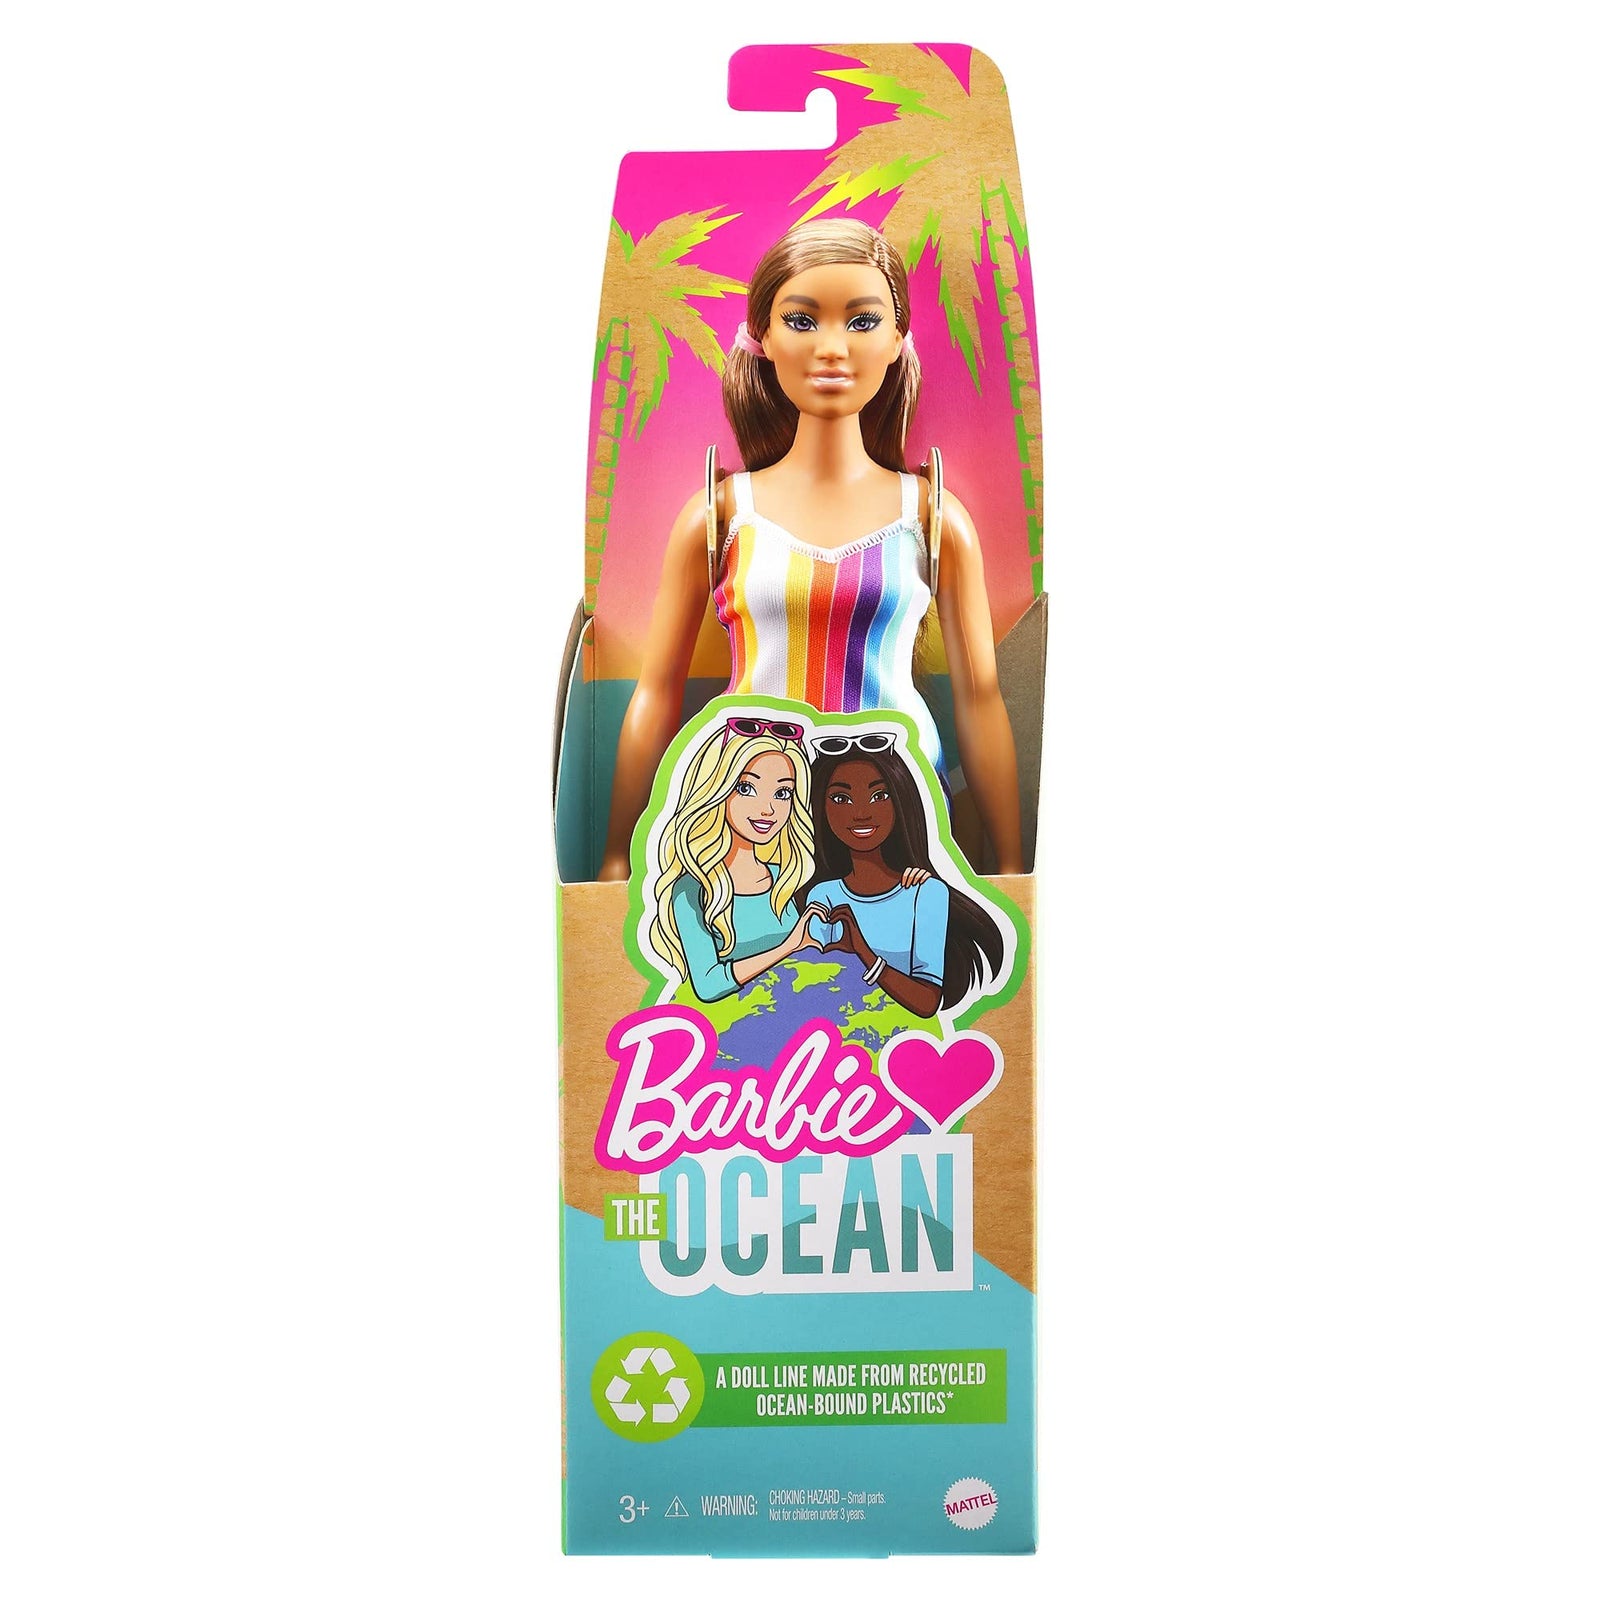 Barbie Loves The Ocean Beach-Themed Doll (11.5-inch Blonde), Made from Recycled Plastics, Wearing Fashion & Accessories, Gift for 3 to 7 Year Olds